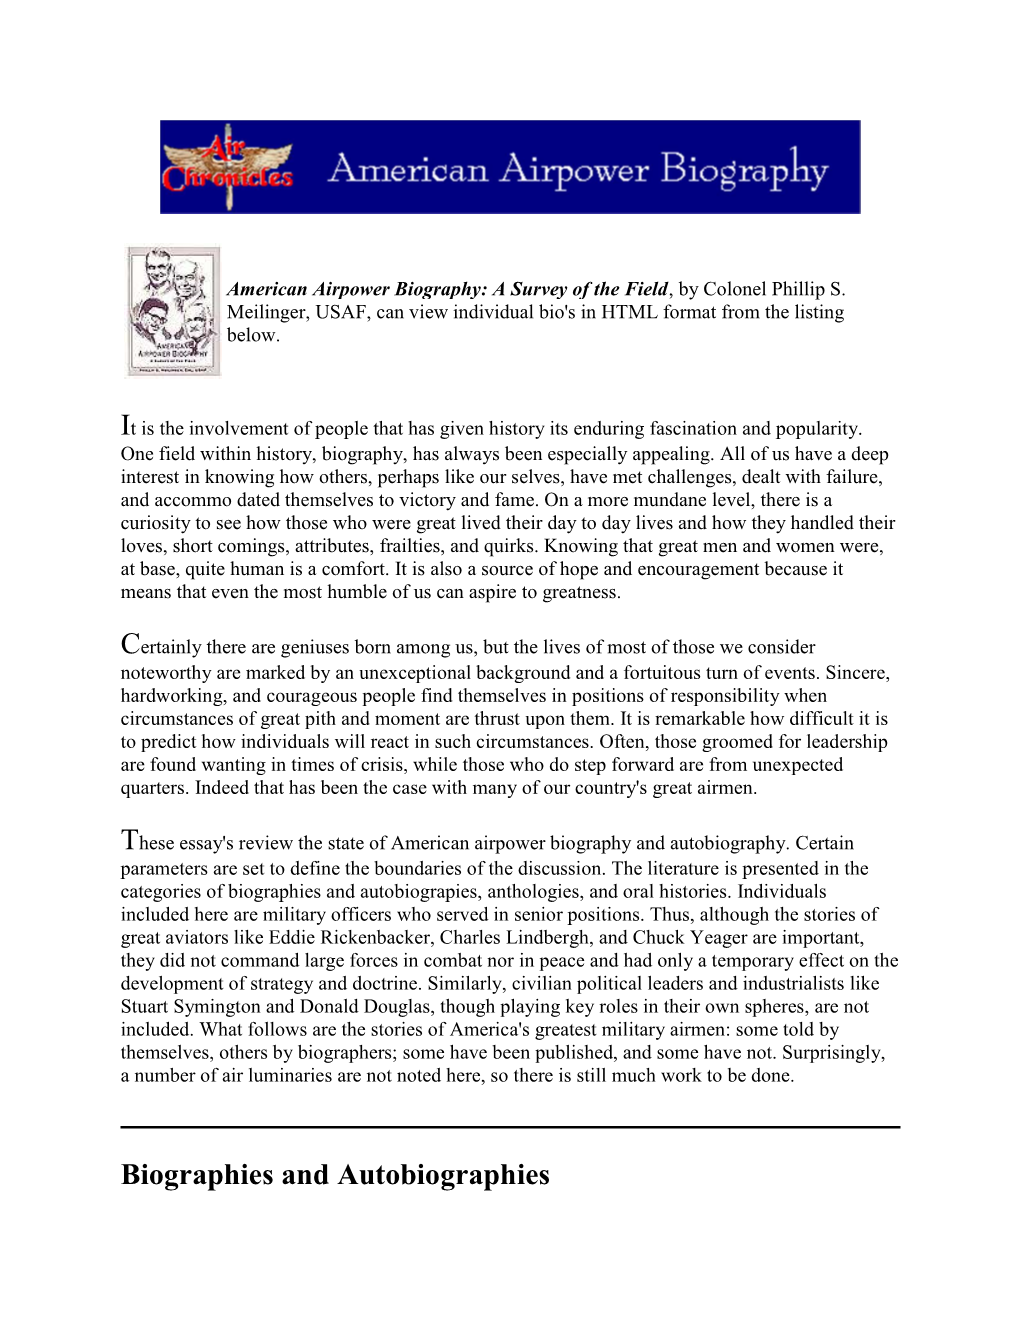 American Airpower Biography: a Survey of the Field, by Colonel Phillip S